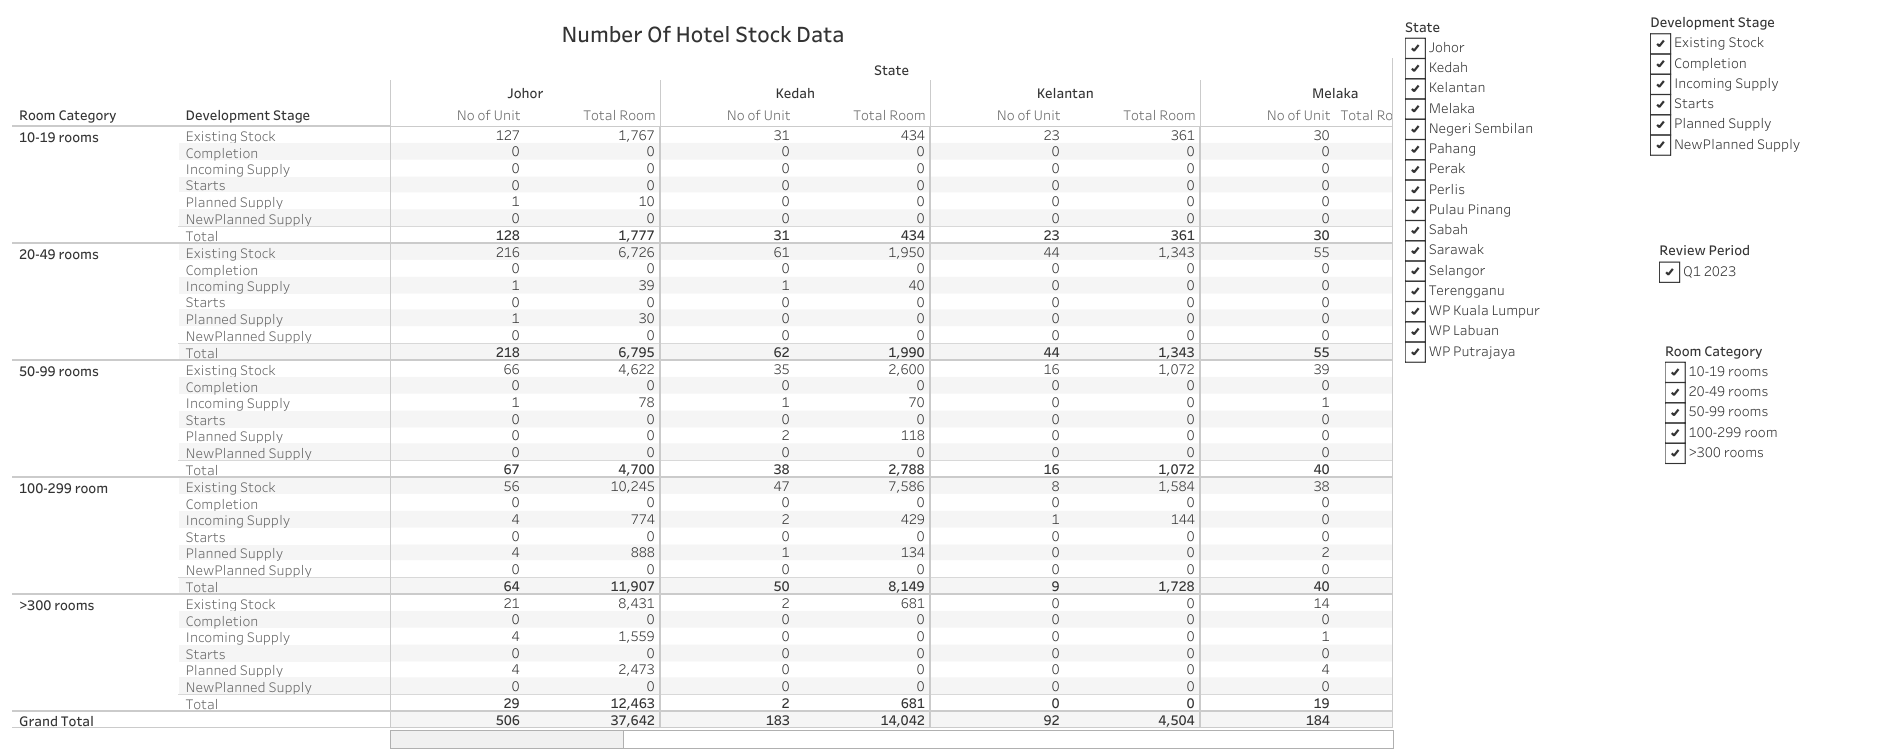 Number of Hotel Stock Data